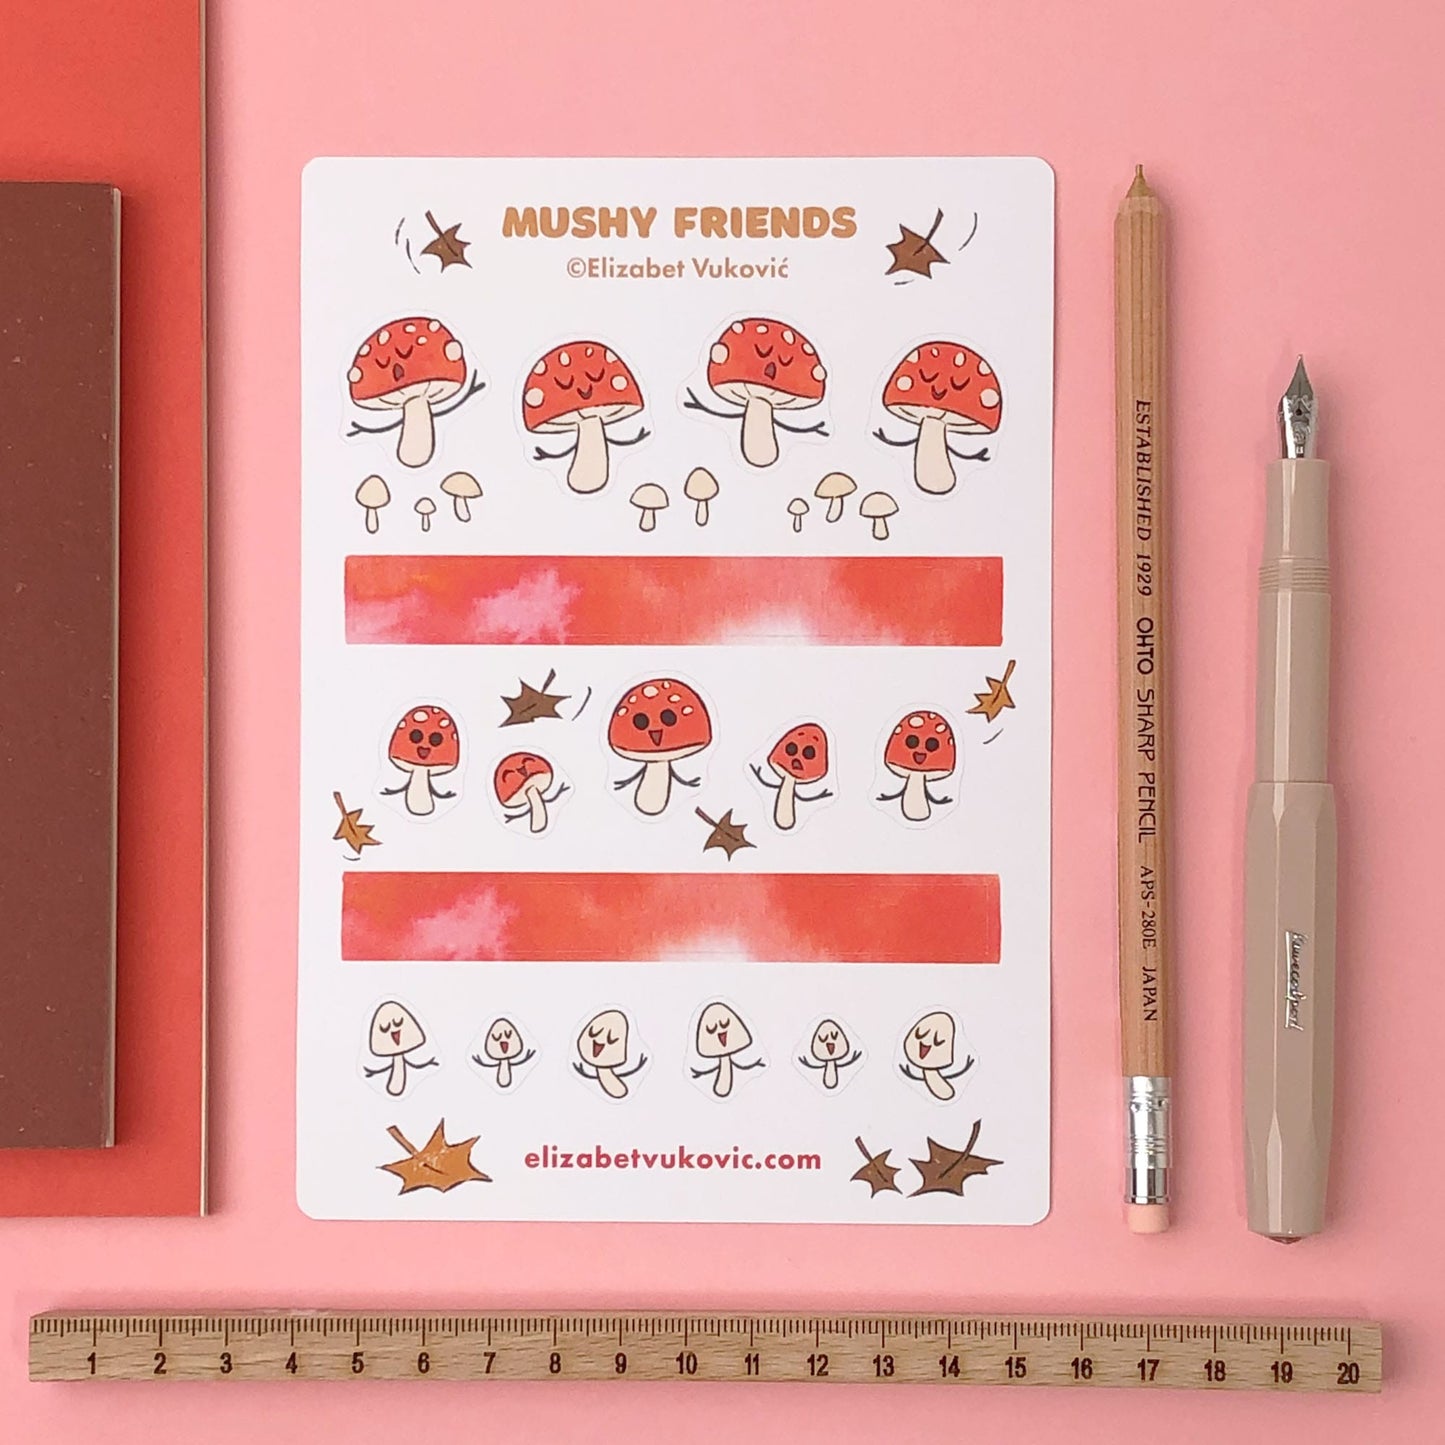 Cute mushroom stickers and washi tape beside stationery.